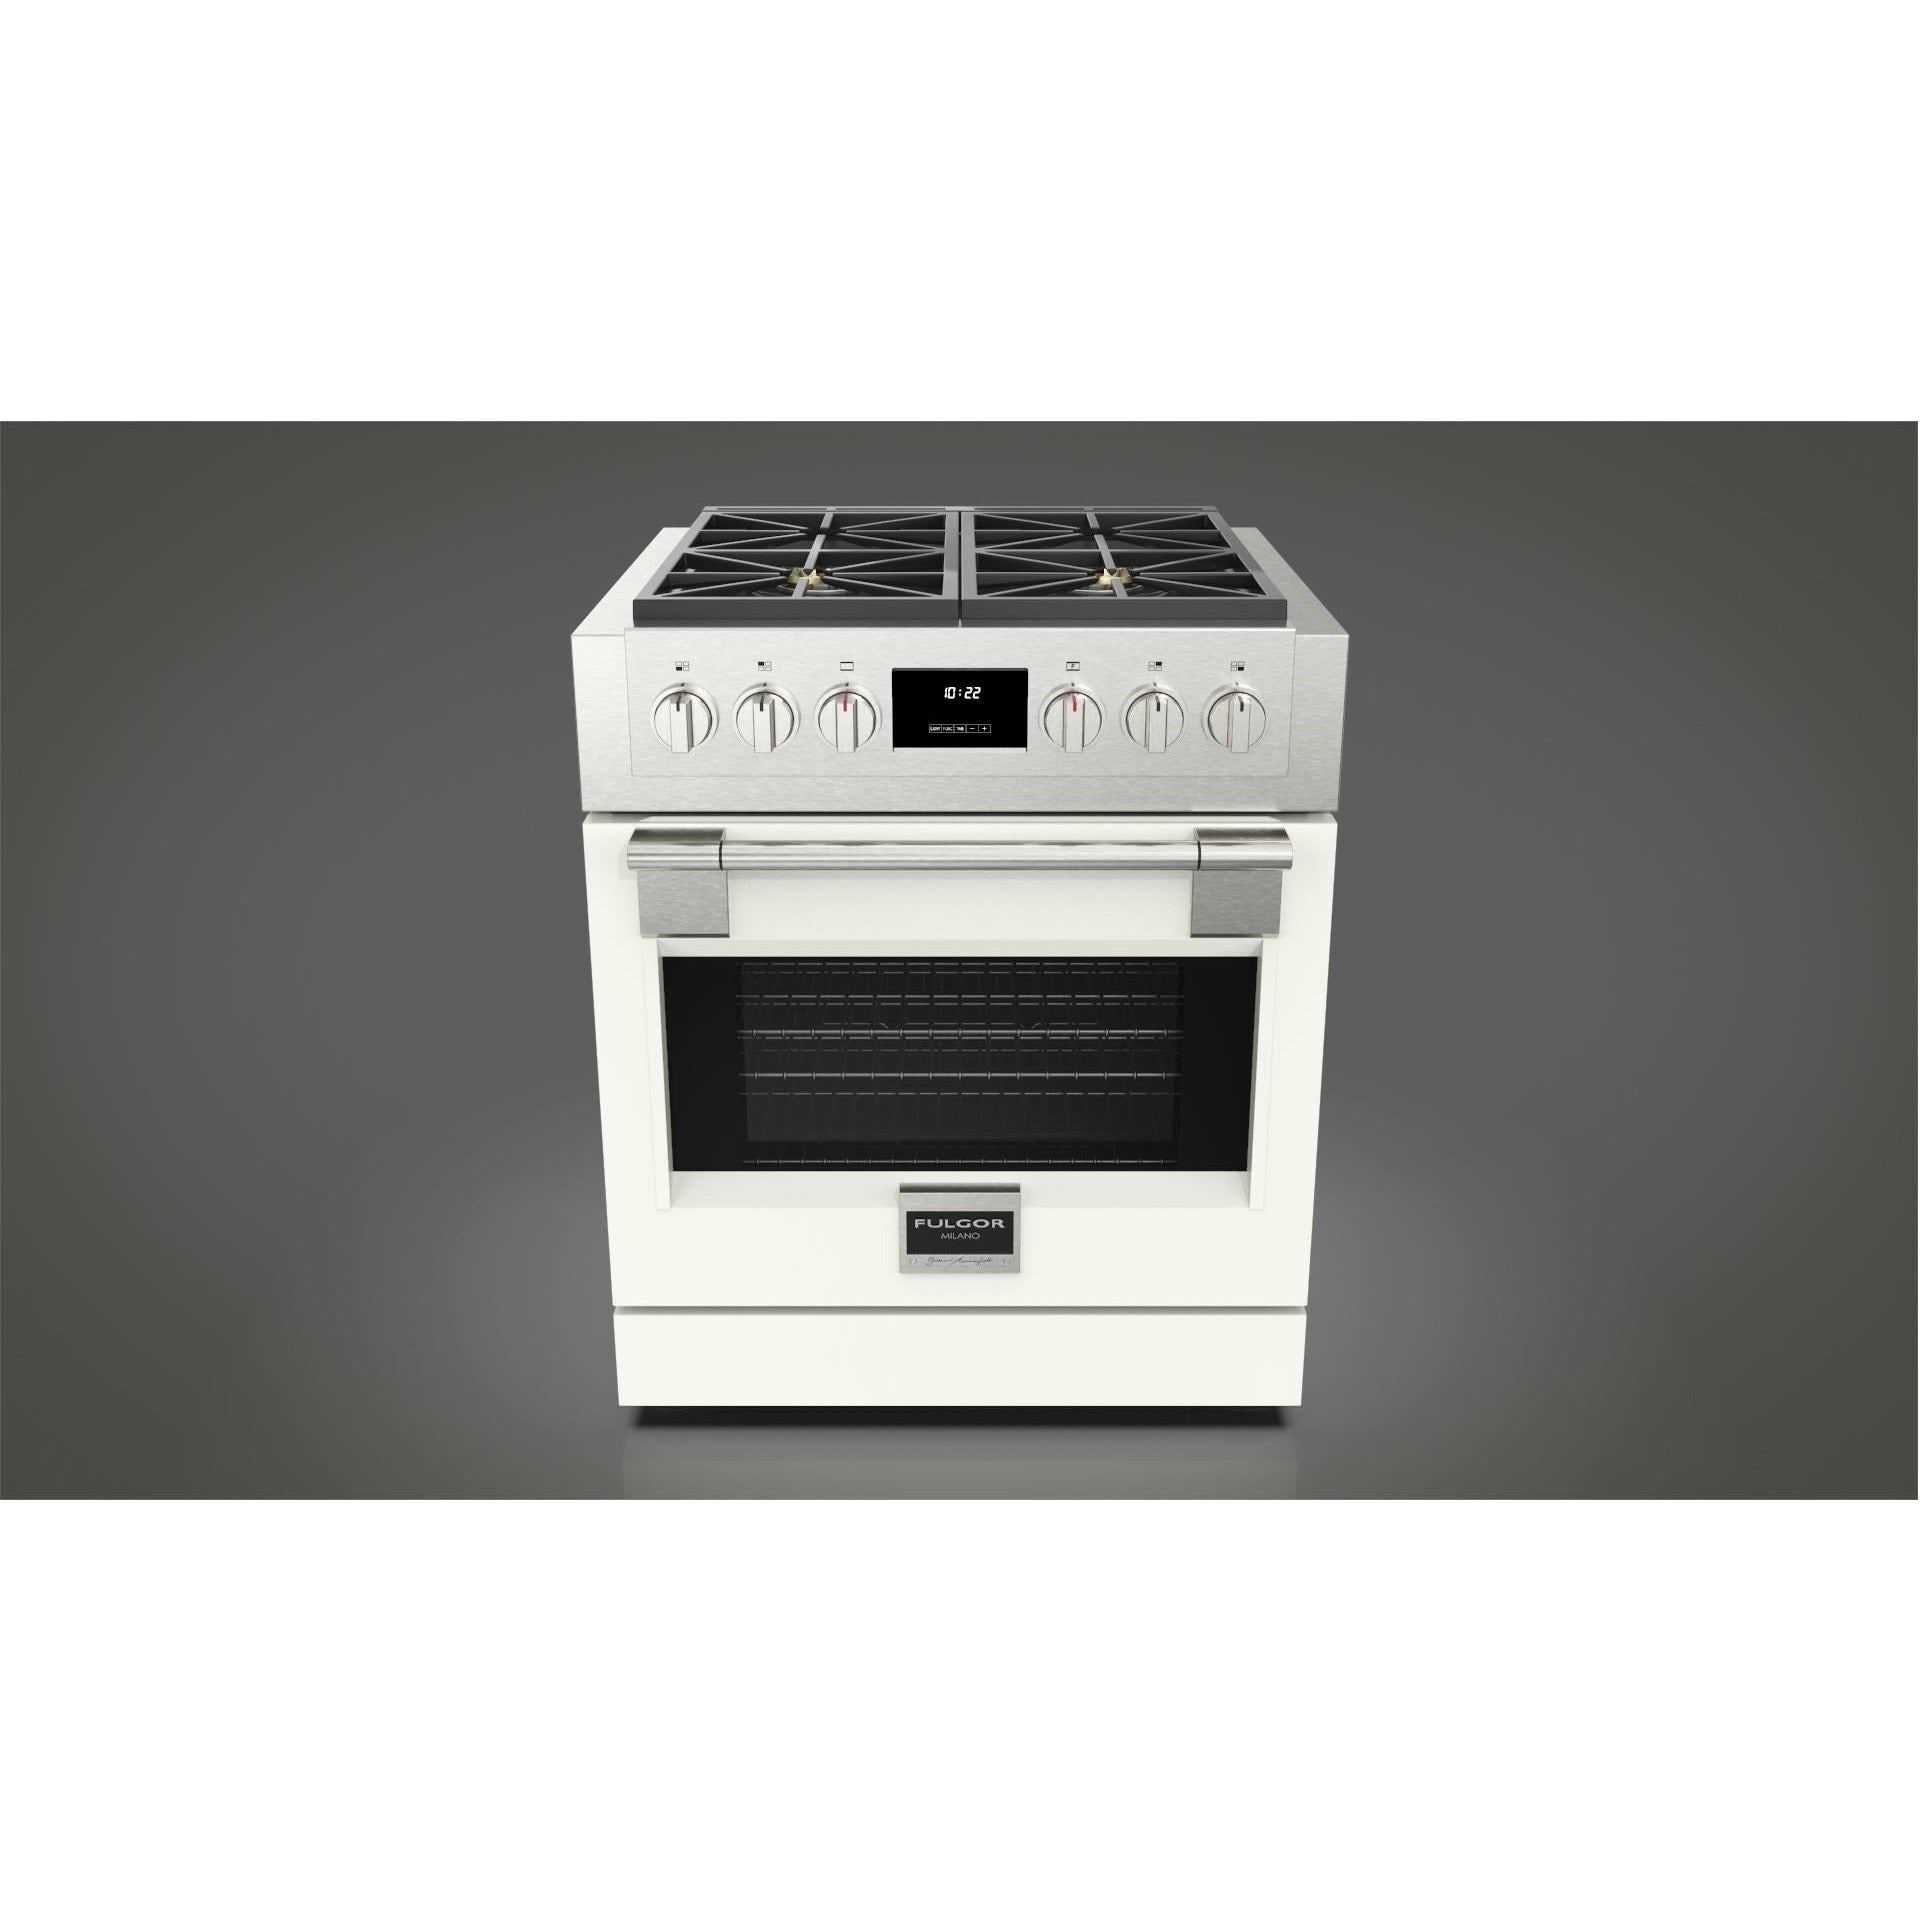 Fulgor Milano 30" Professional All Gas Range with 4 Dual-Flame Burners, 4.4 cu. ft. Capacity w/ Stainless Steel - F6PGR304S2